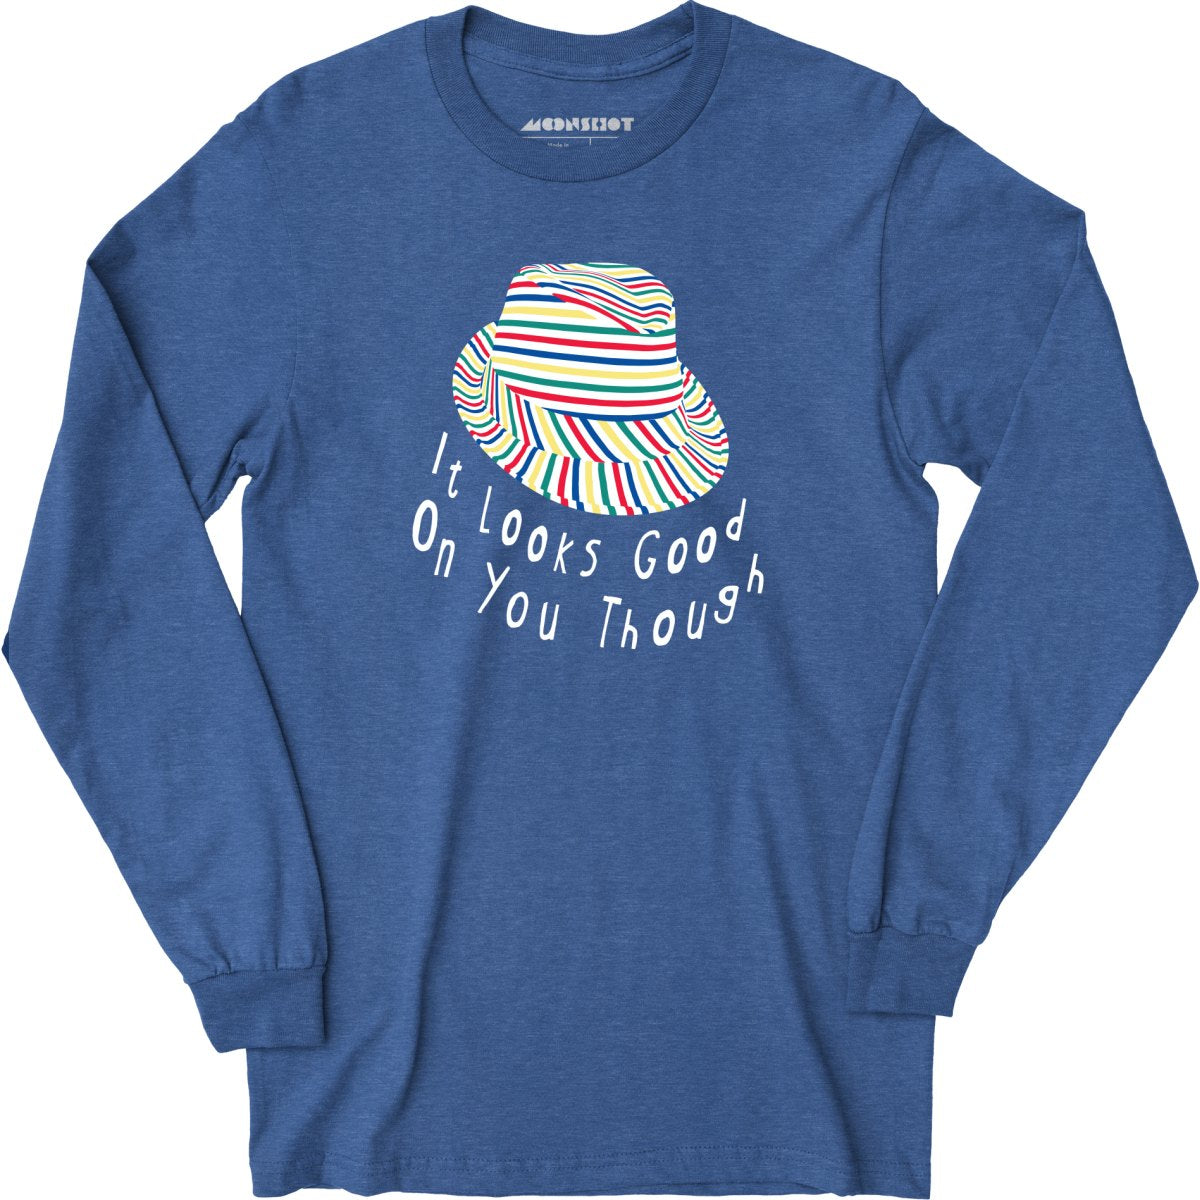 It Looks Good on You Though - Long Sleeve T-Shirt